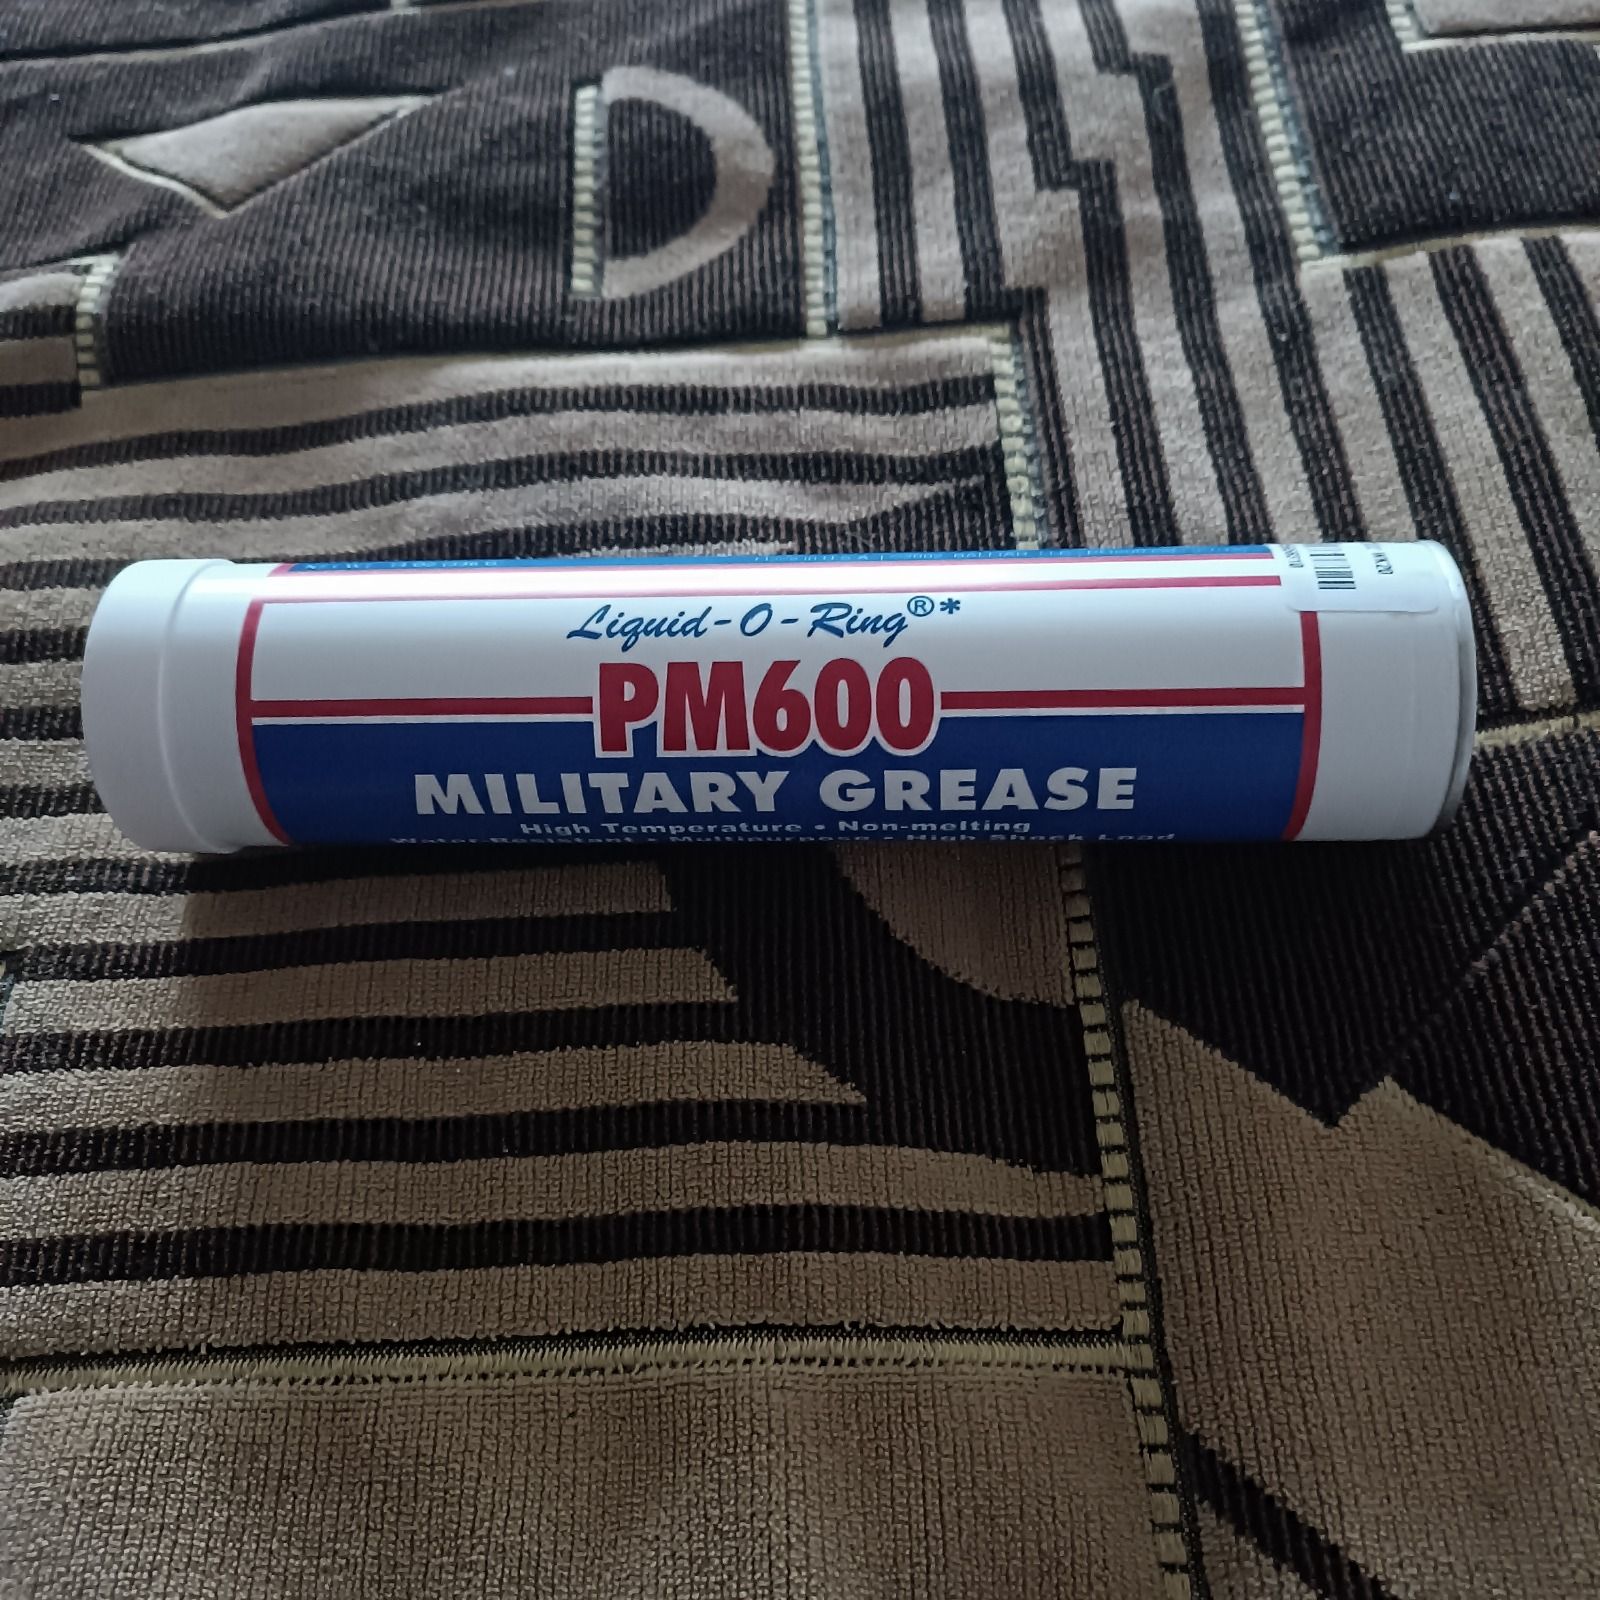 PM600 Military Grease